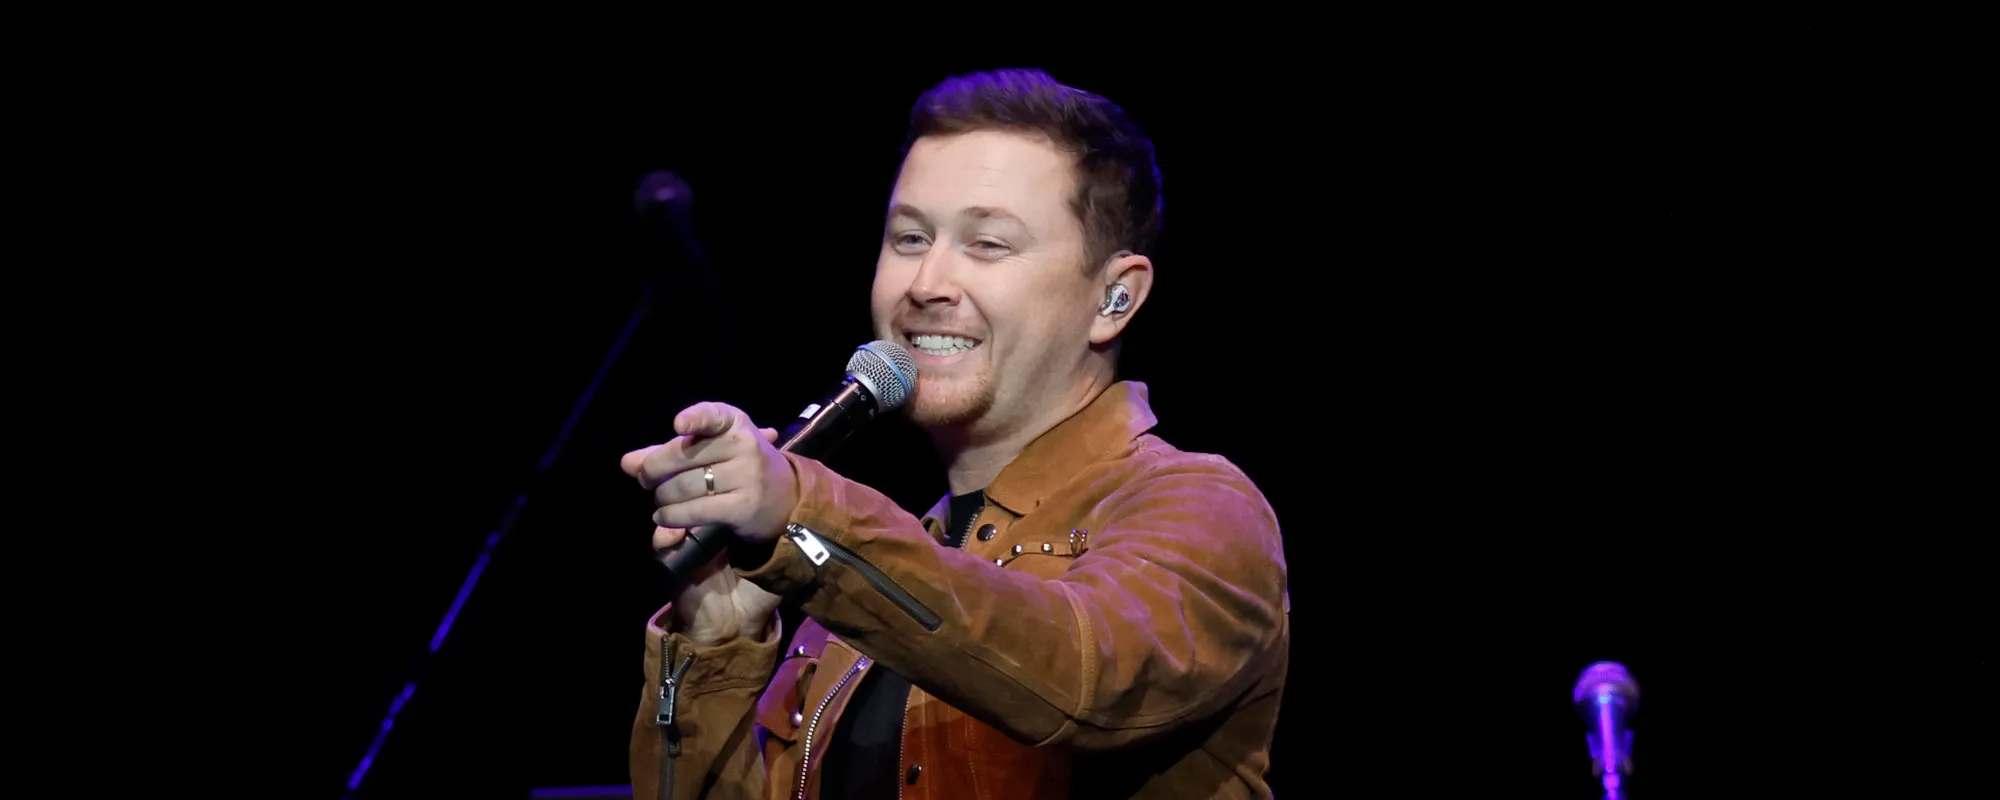 Lainey Wilson, Scotty McCreery Among Performers on Circle Network’s Toys for Tots Series